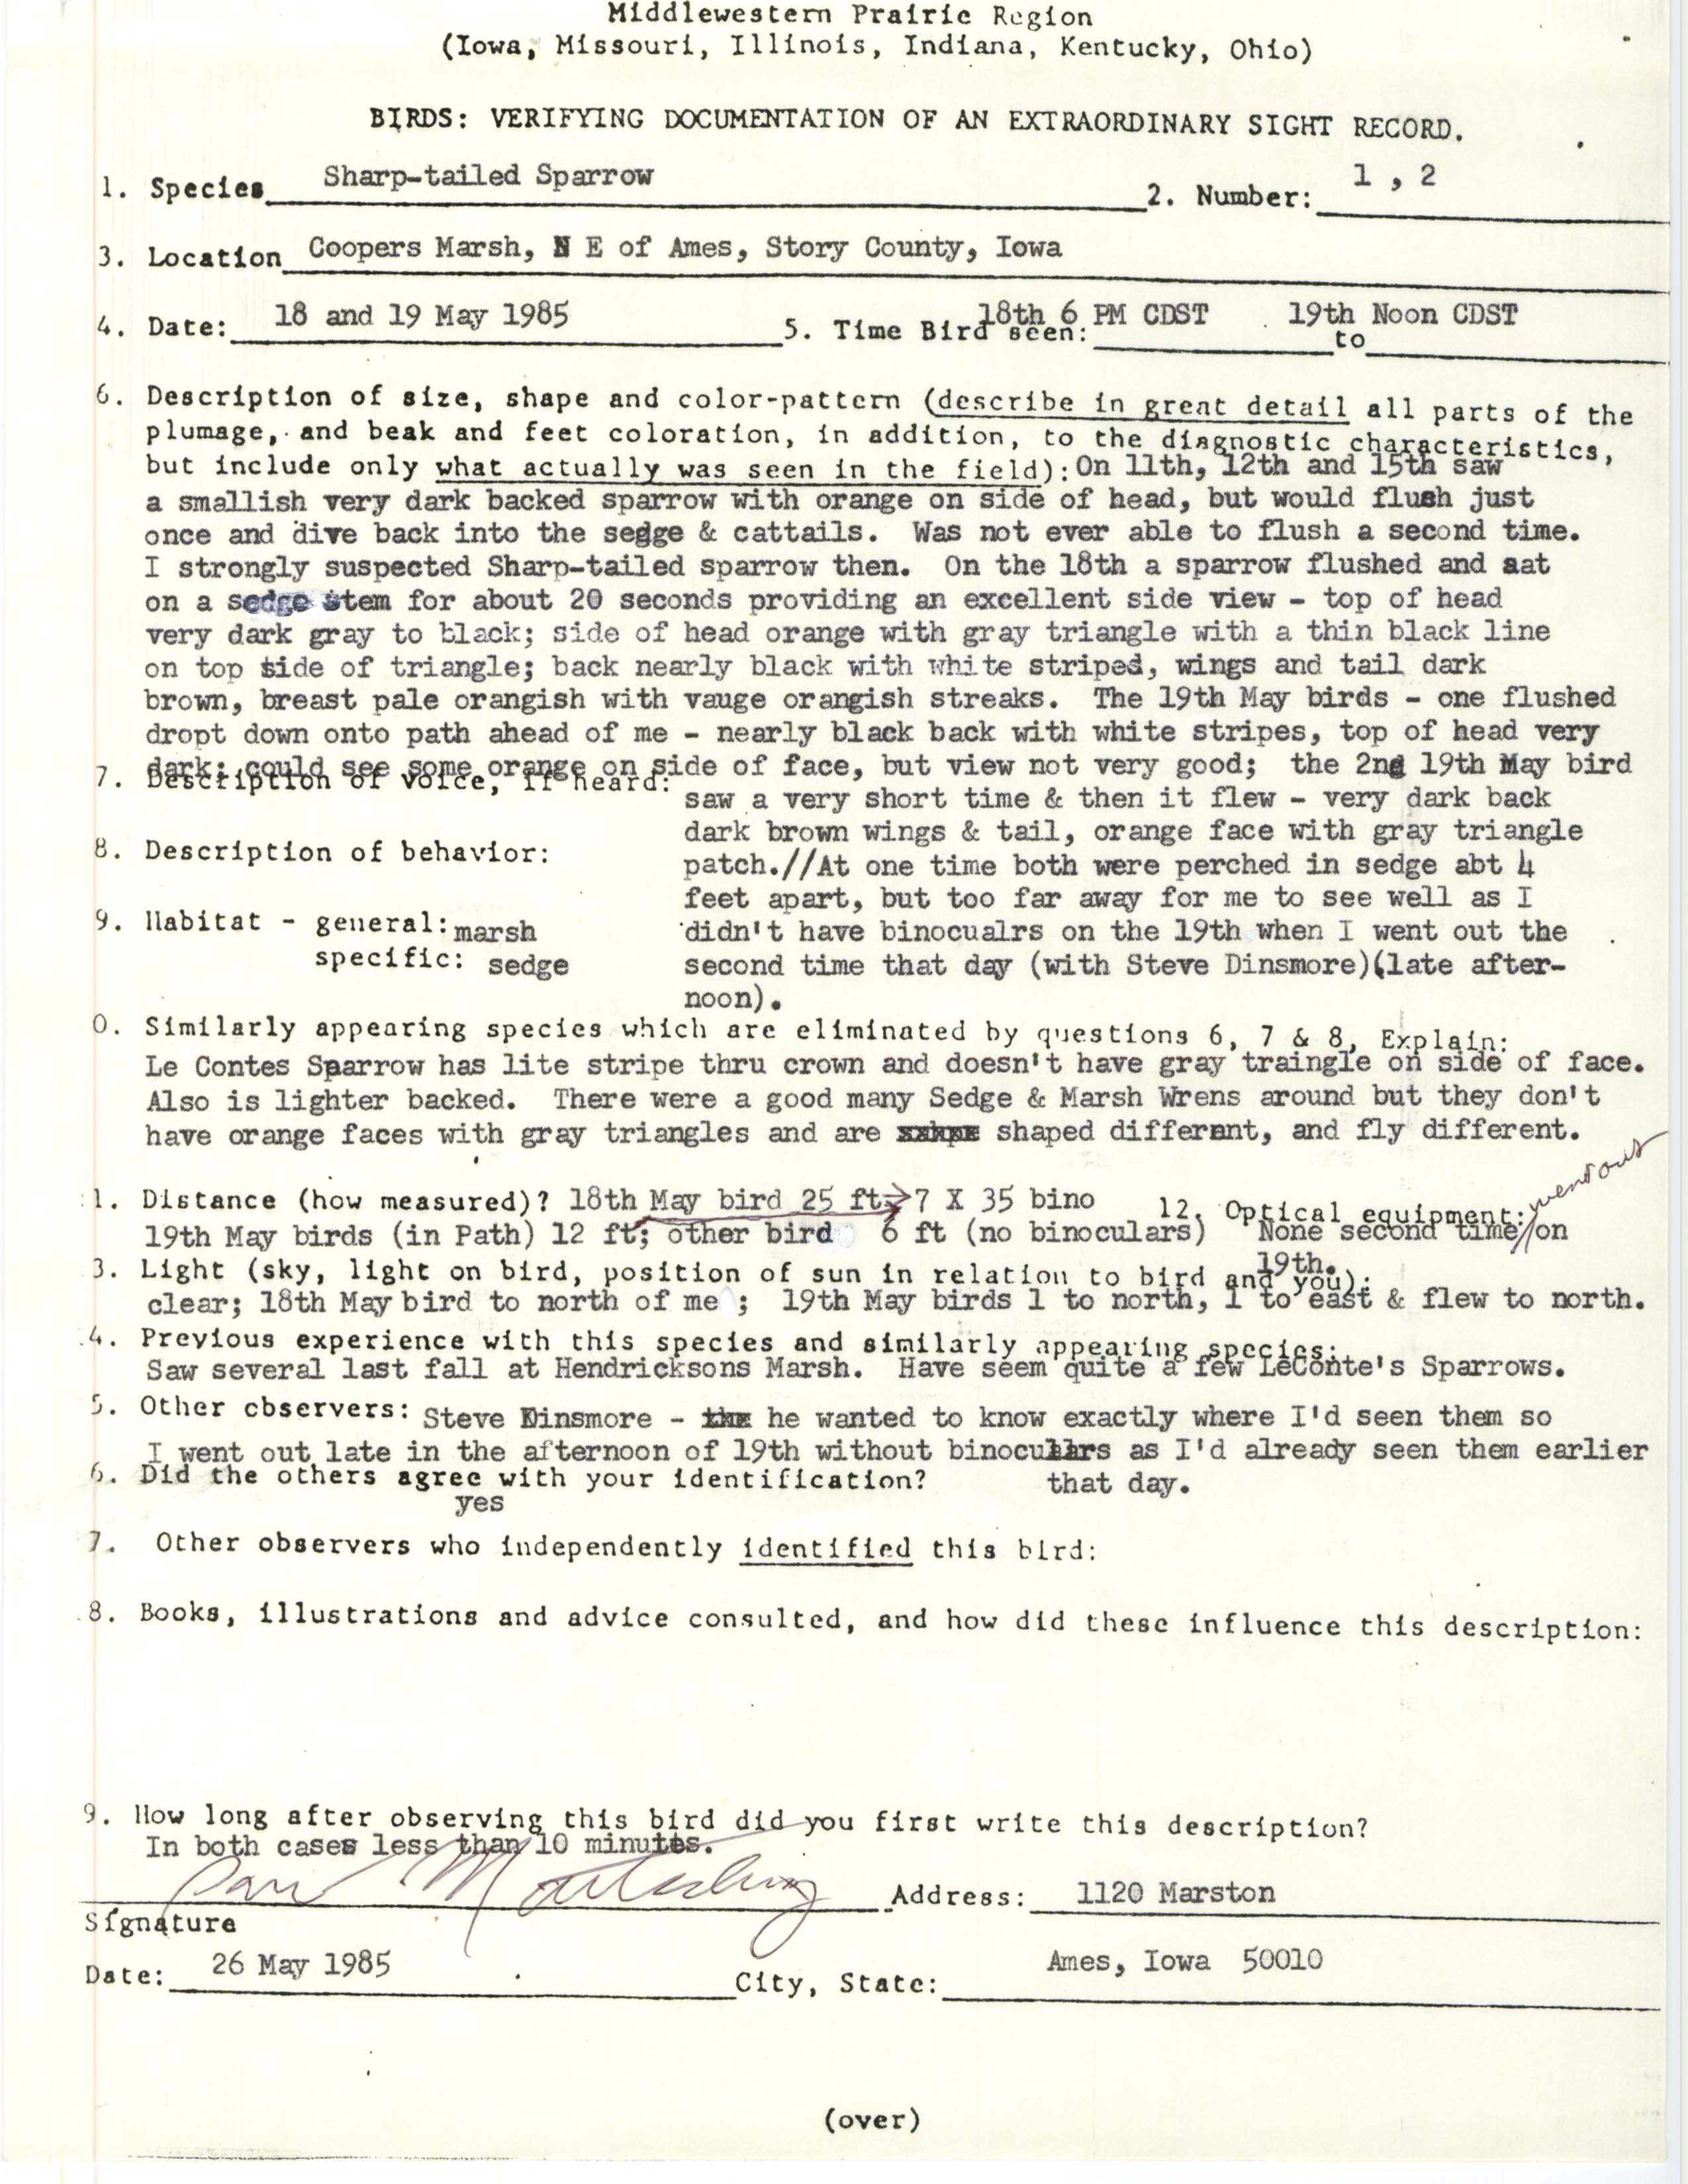 Rare bird documentation form for Sharp-tailed Sparrow at Coopers Marsh in 1985